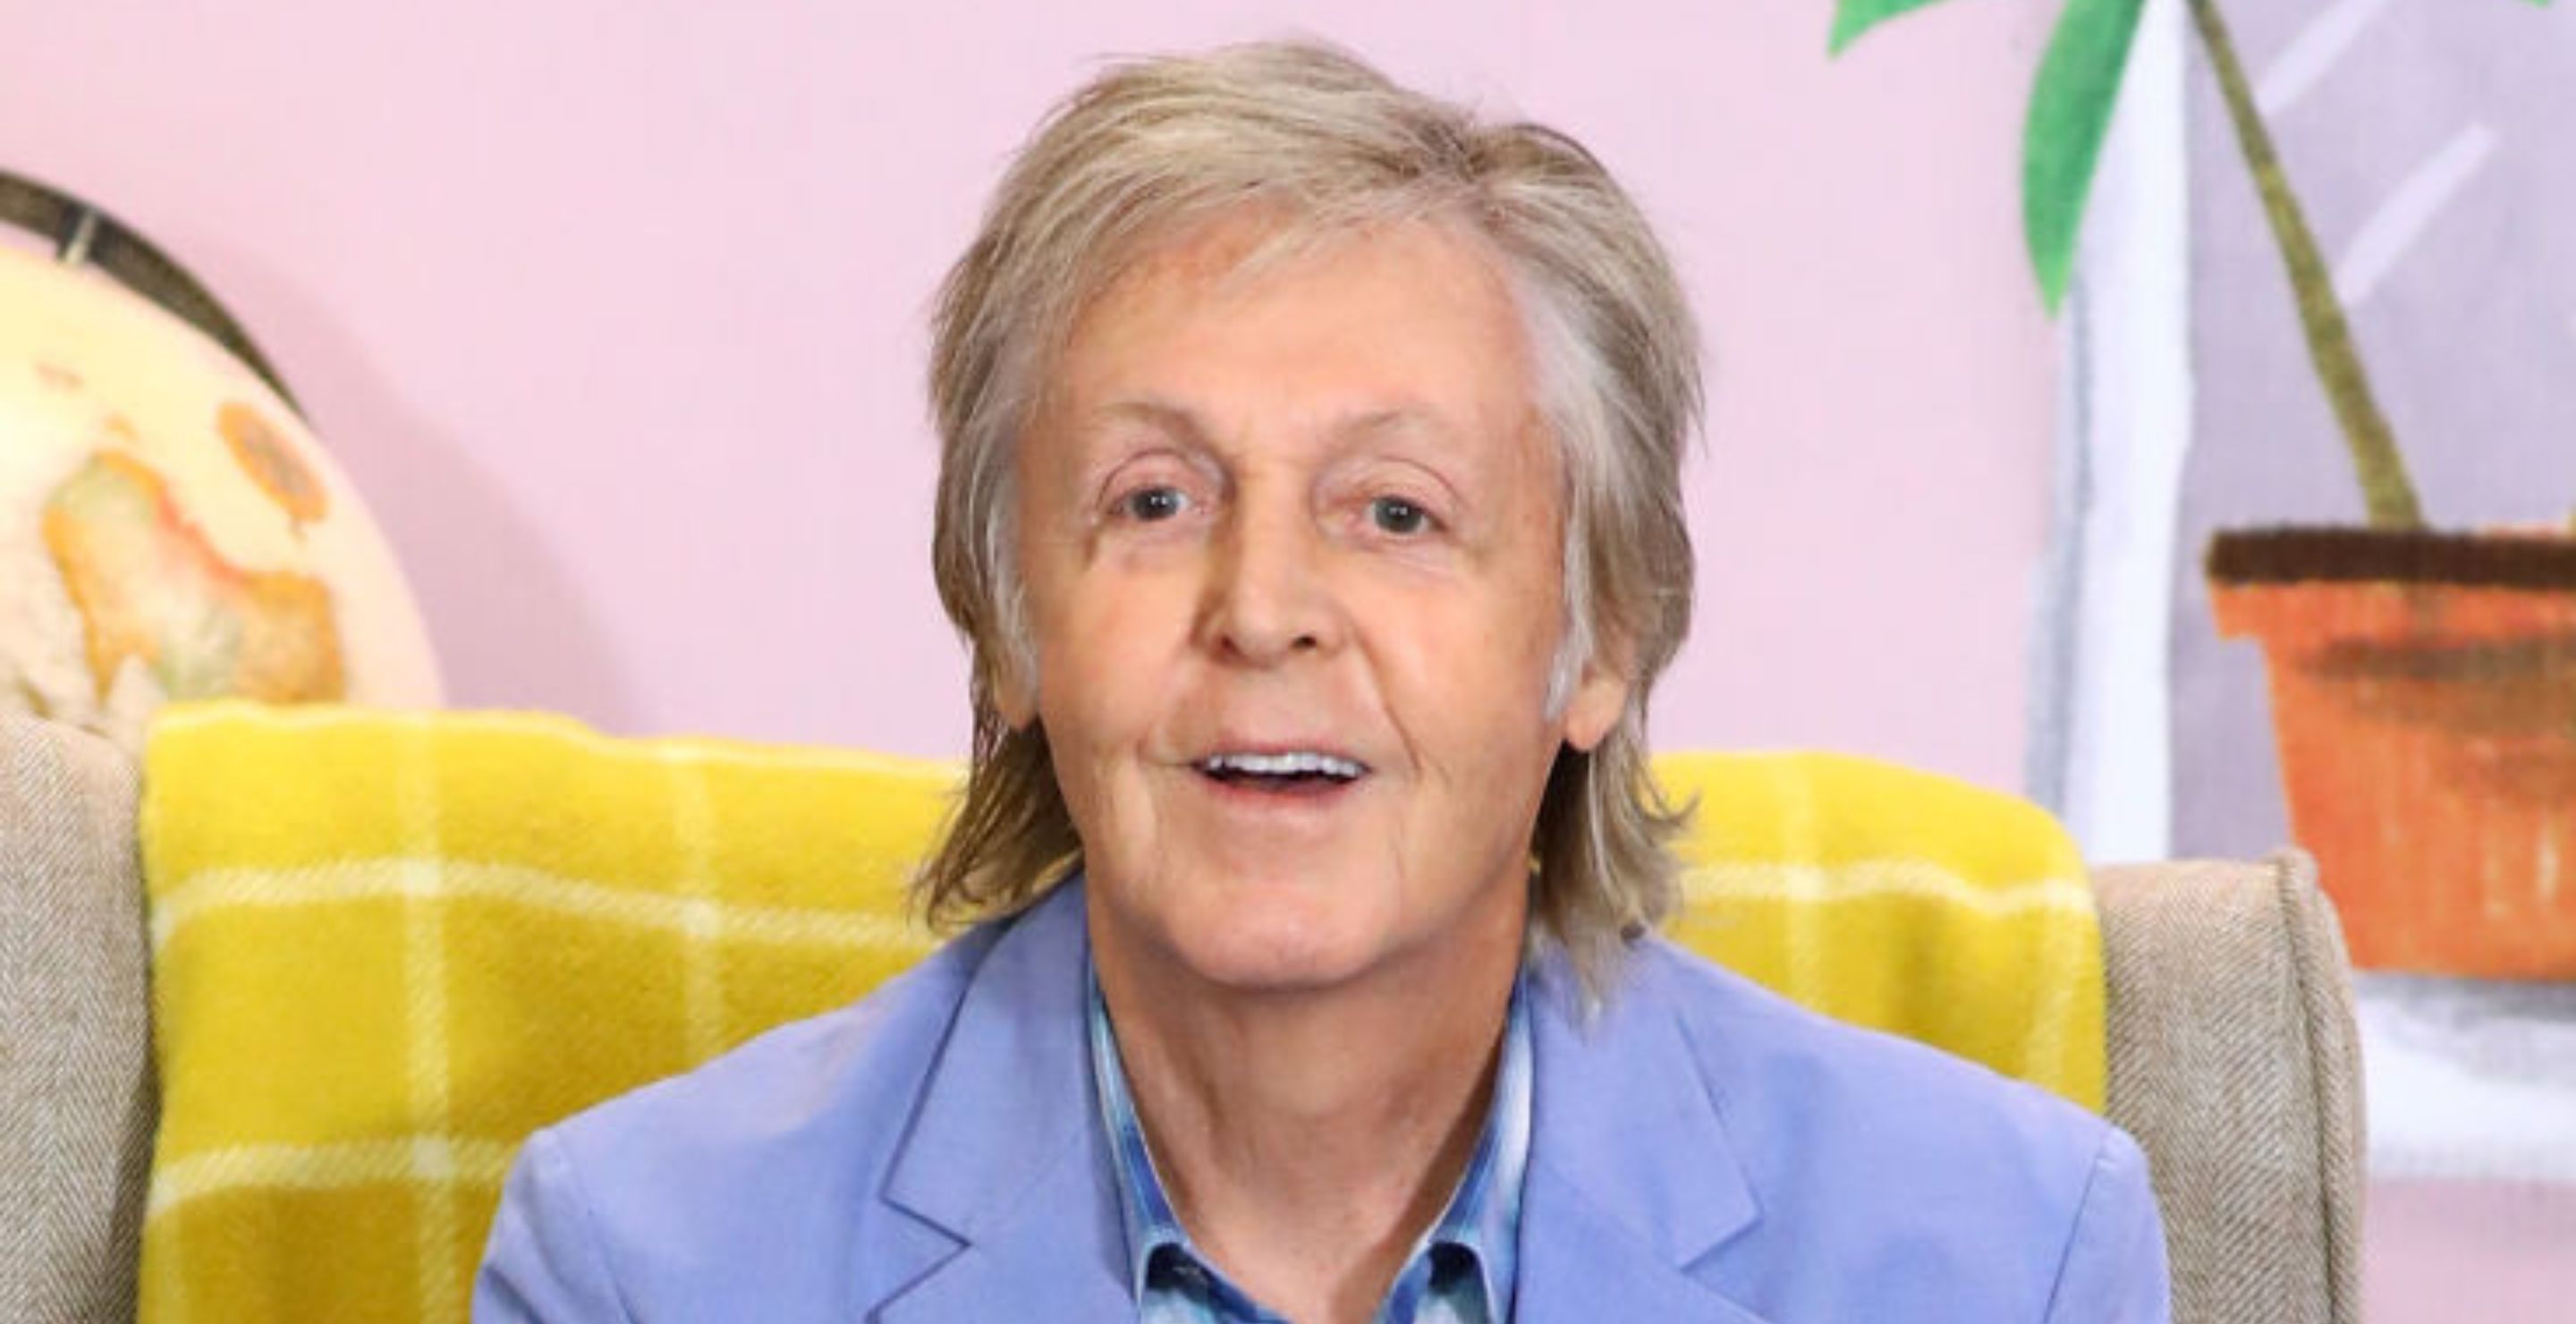 Paul McCartney Jamming With Taylor Swift Fans Is The Best Thing You'll See Today